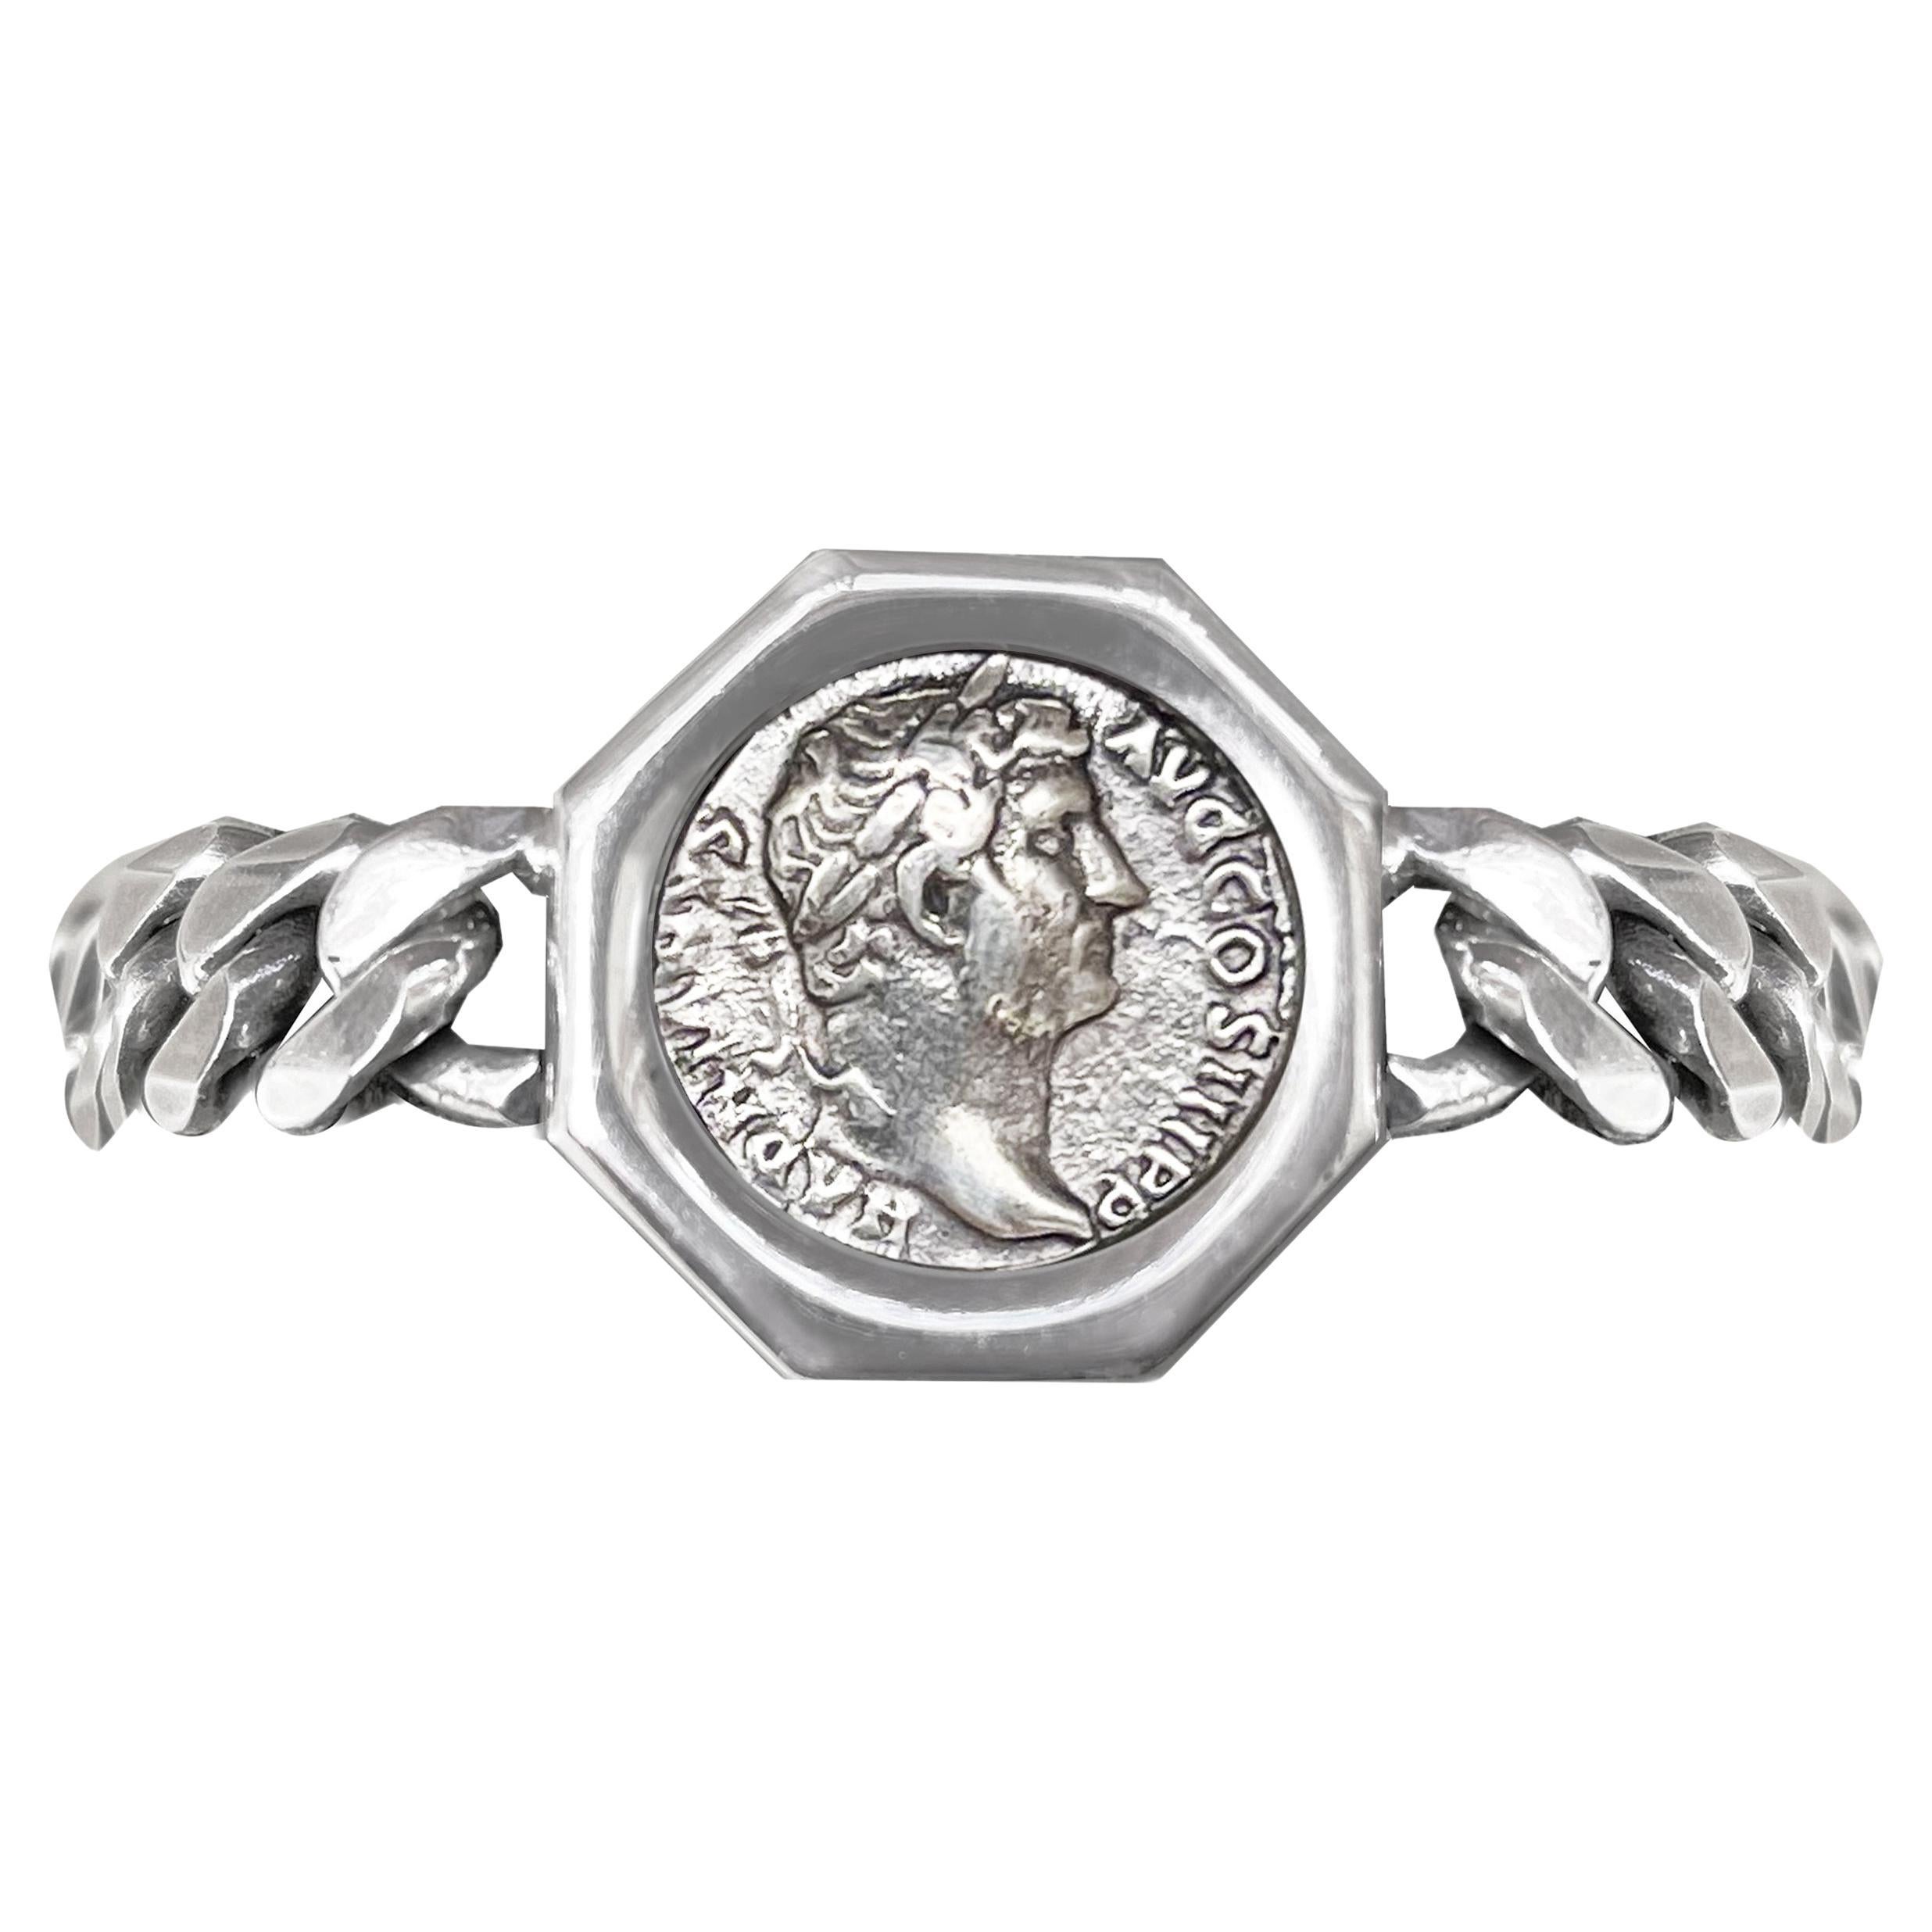 Emperor Hadrian Roman Coin 2nd Cent. AD Sterling Silver Bracelet For Sale